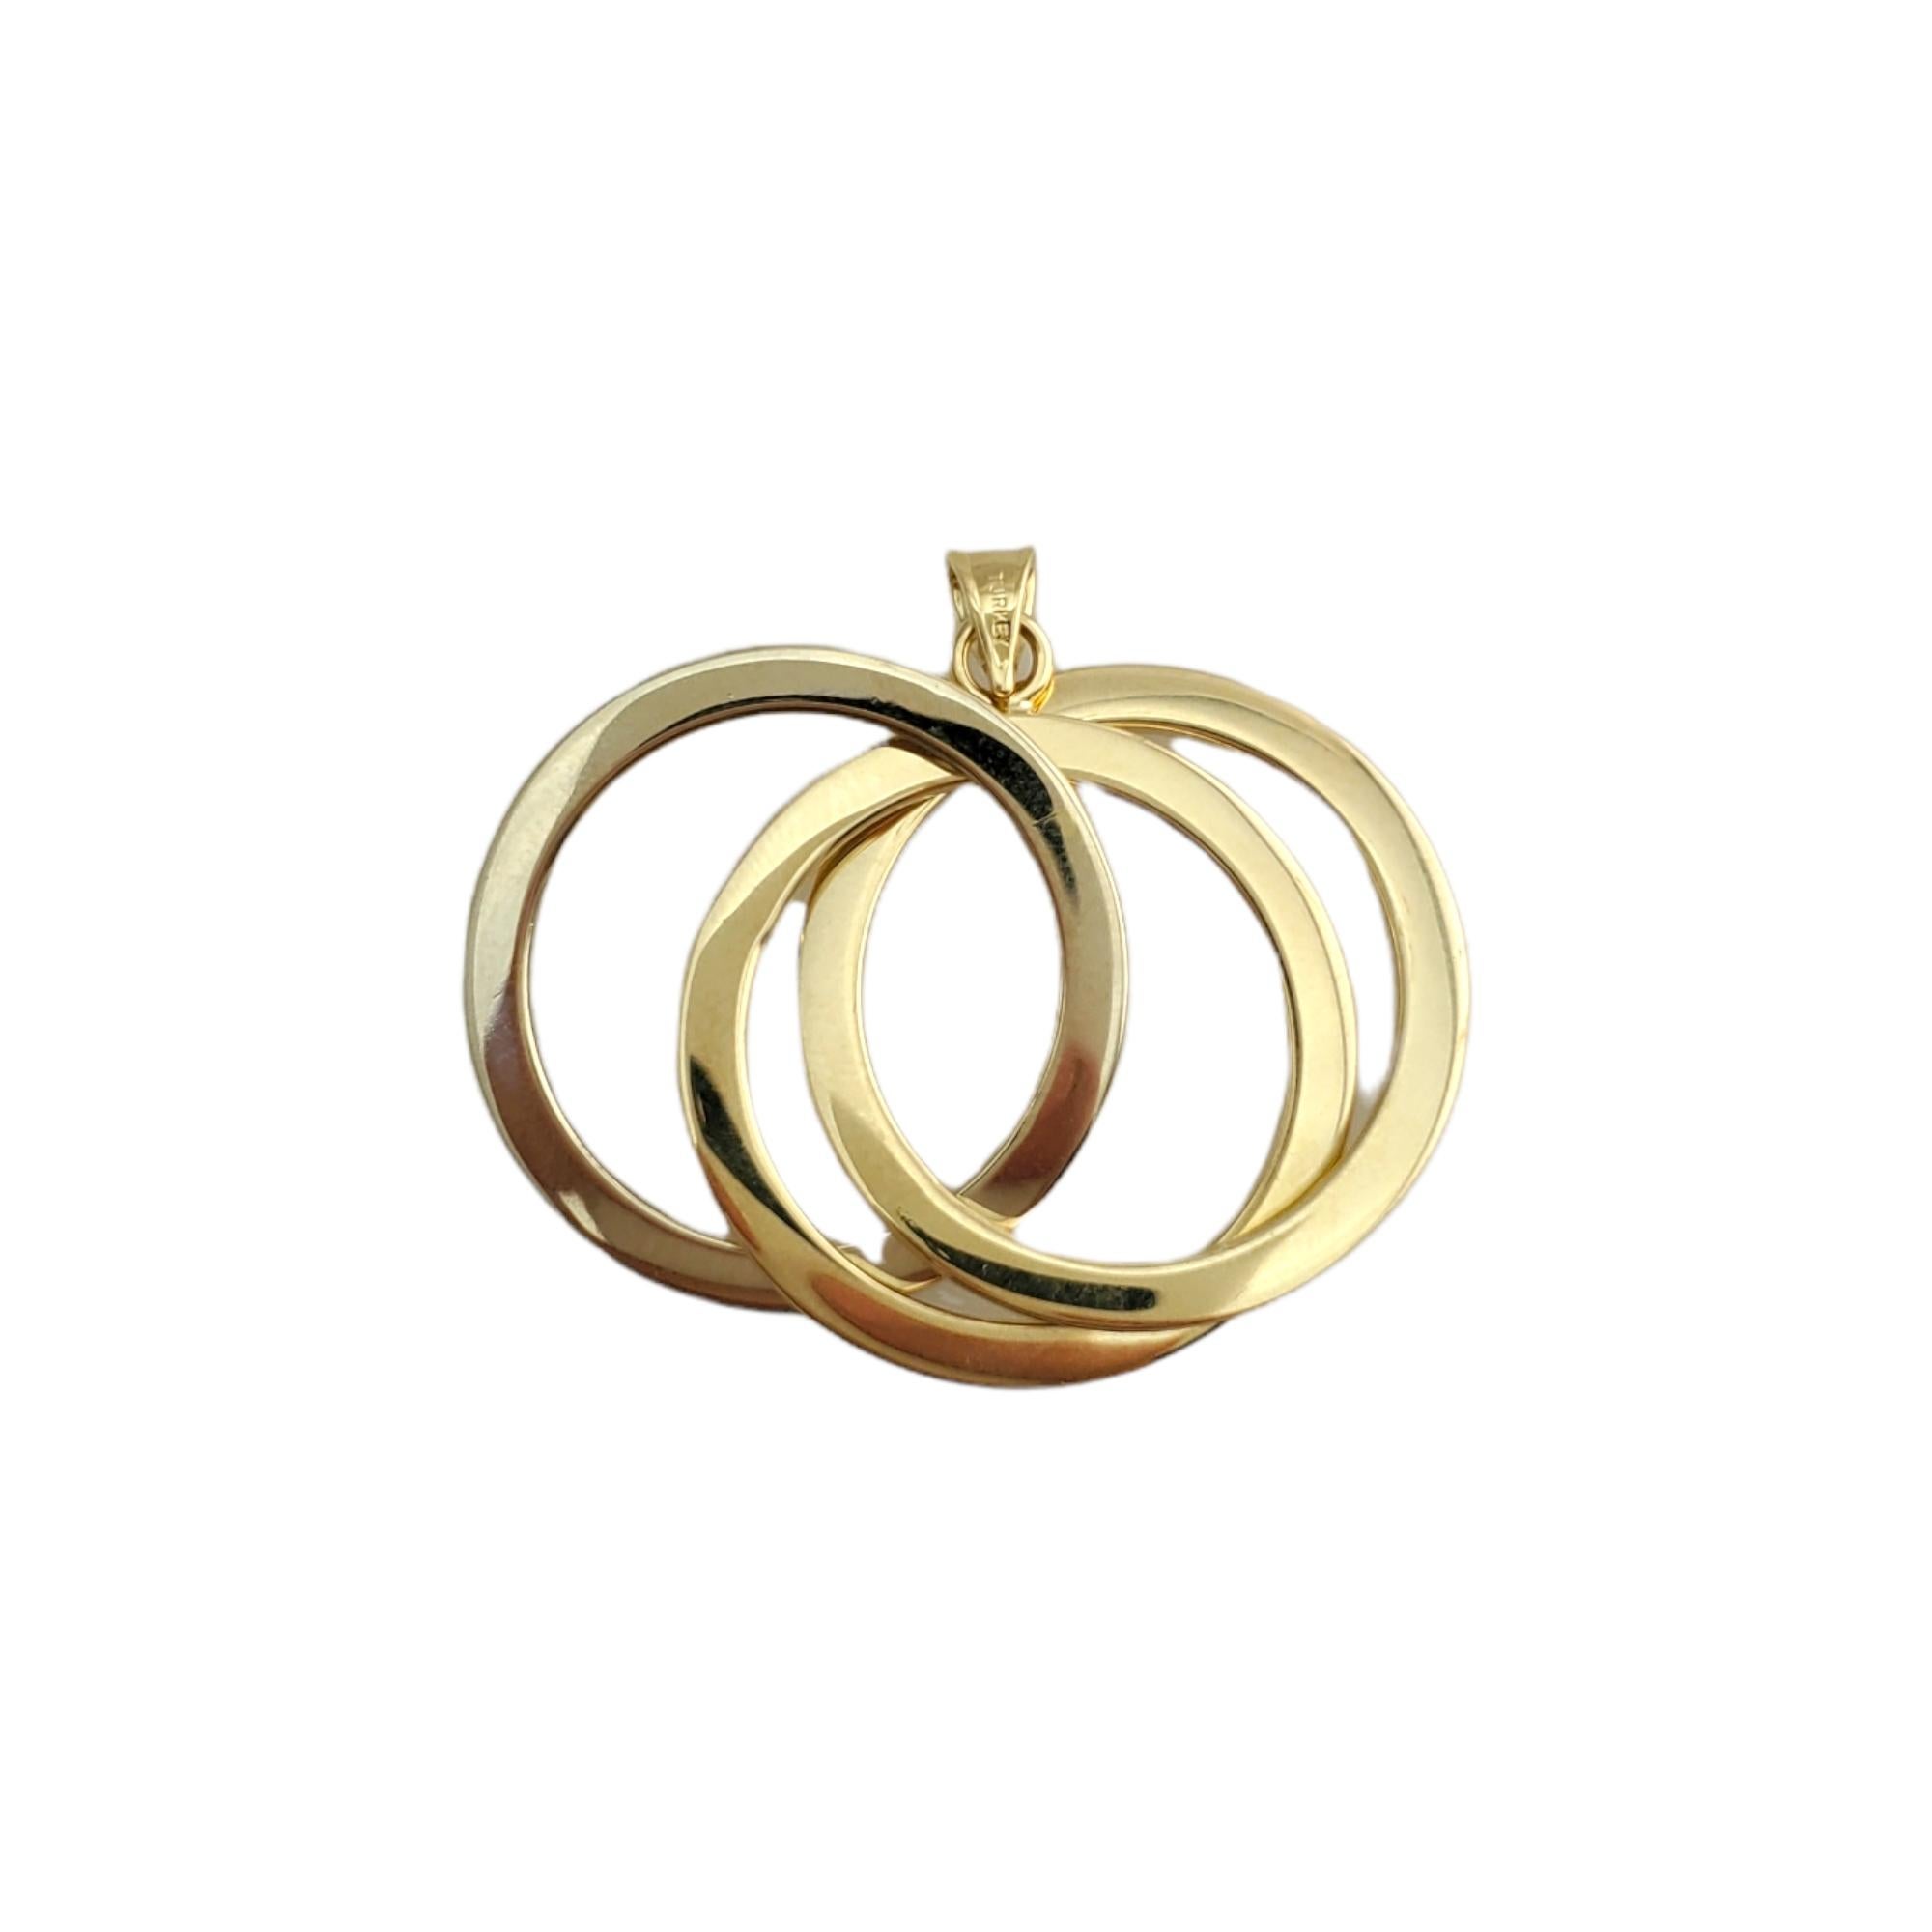 14K Yellow Gold 3 Circle Pendant 

You'll love this yellow gold 3 circle pendant! 

Size: 23.95mm X 41.16mm

Weight:  3.6gr /  2.3dwt

Hallmark: AU 14K 

Very good condition, professionally polished.

Will come packaged in a gift box and will be